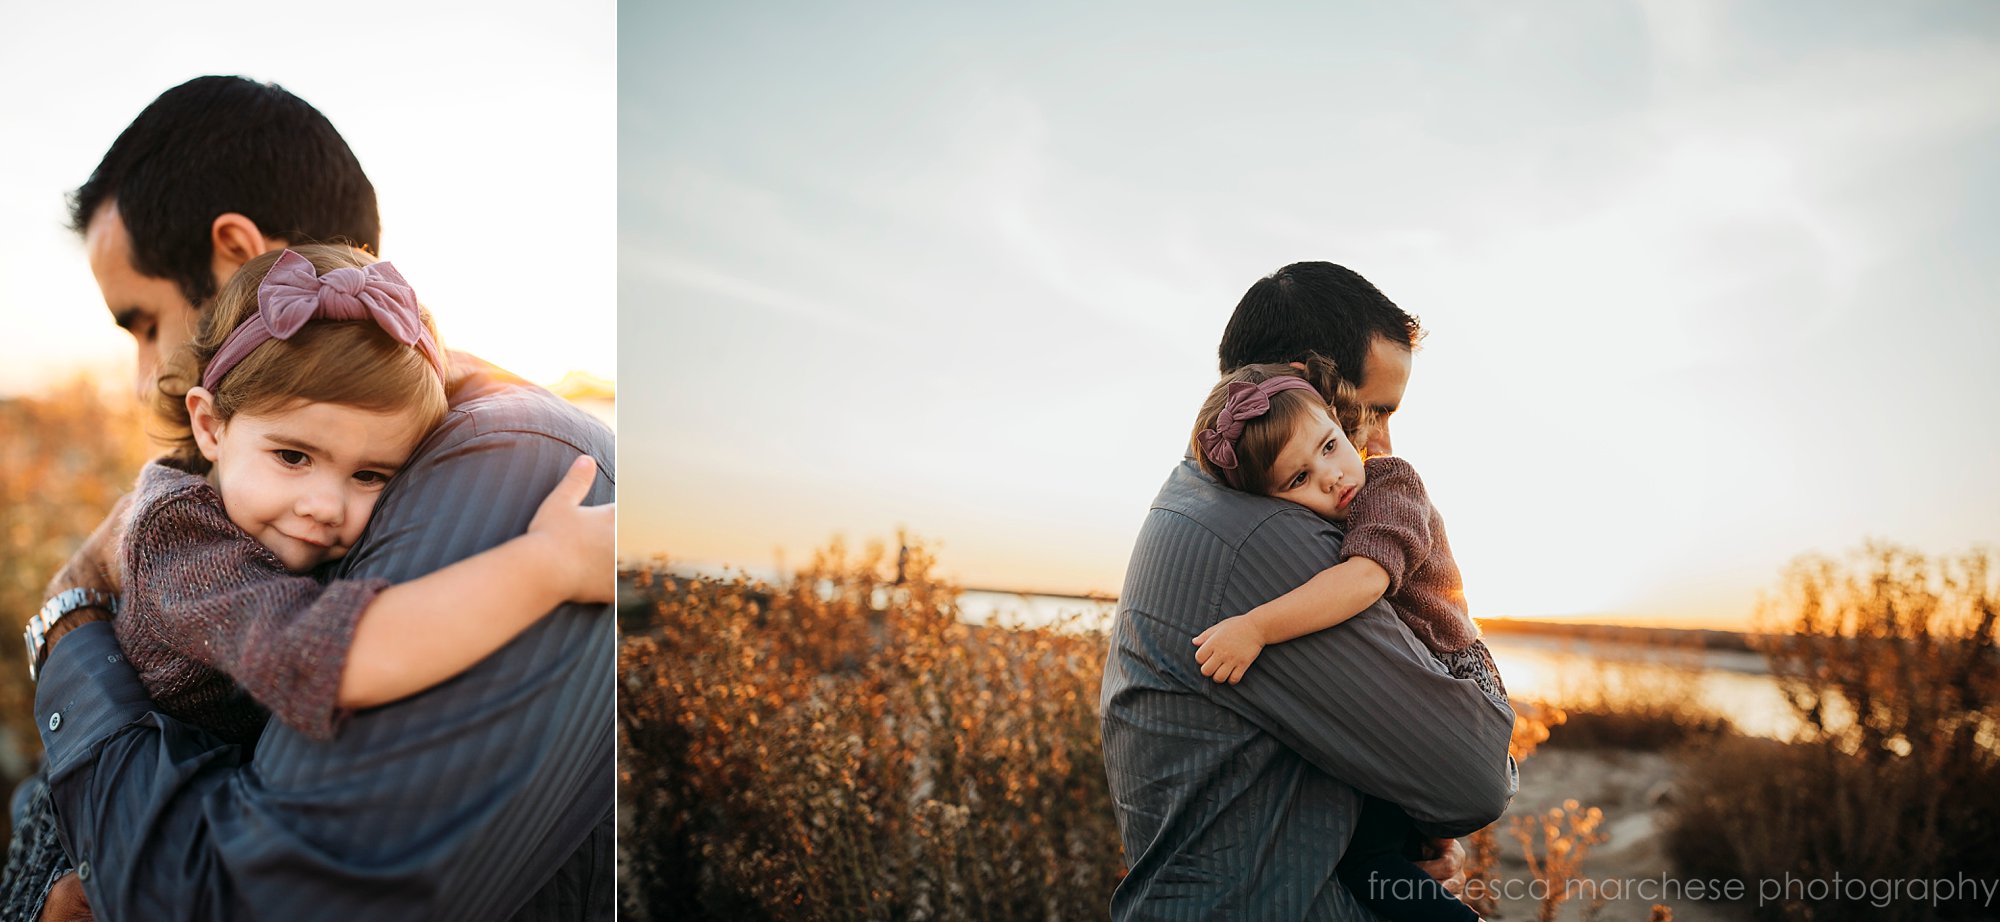 father and daughter - Francesca Marchese Photography Orange County Los Angeles Southern California Family Photographer